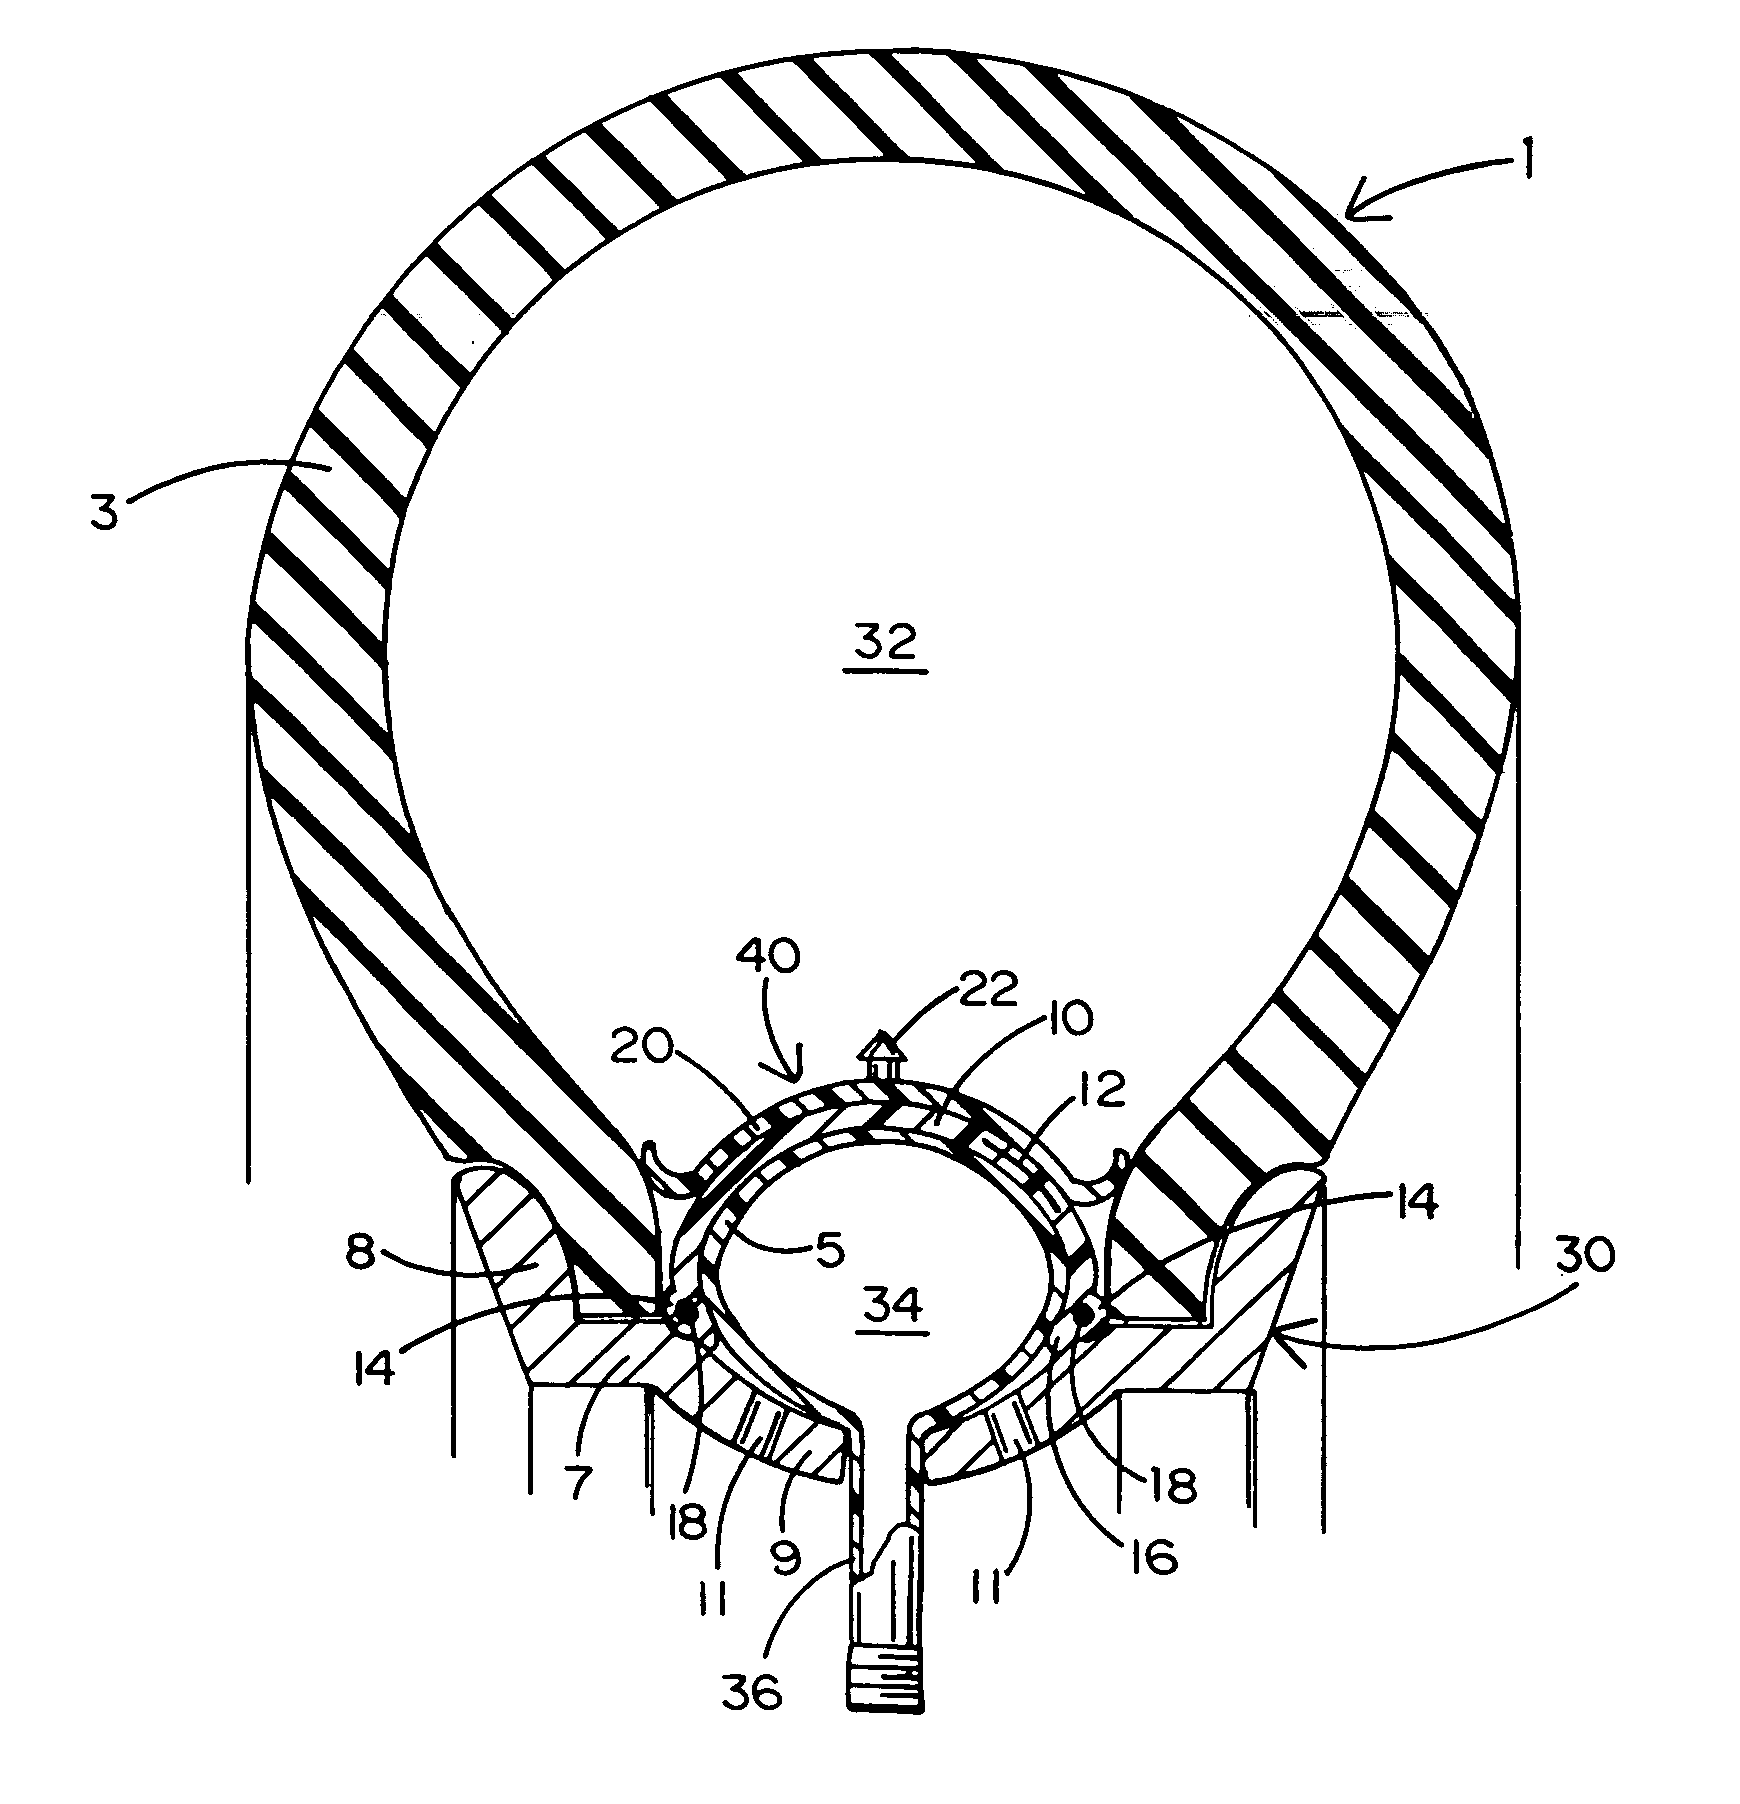 Pneumatic sealing ring having an inner tube and expandable liner for a tube-type tire